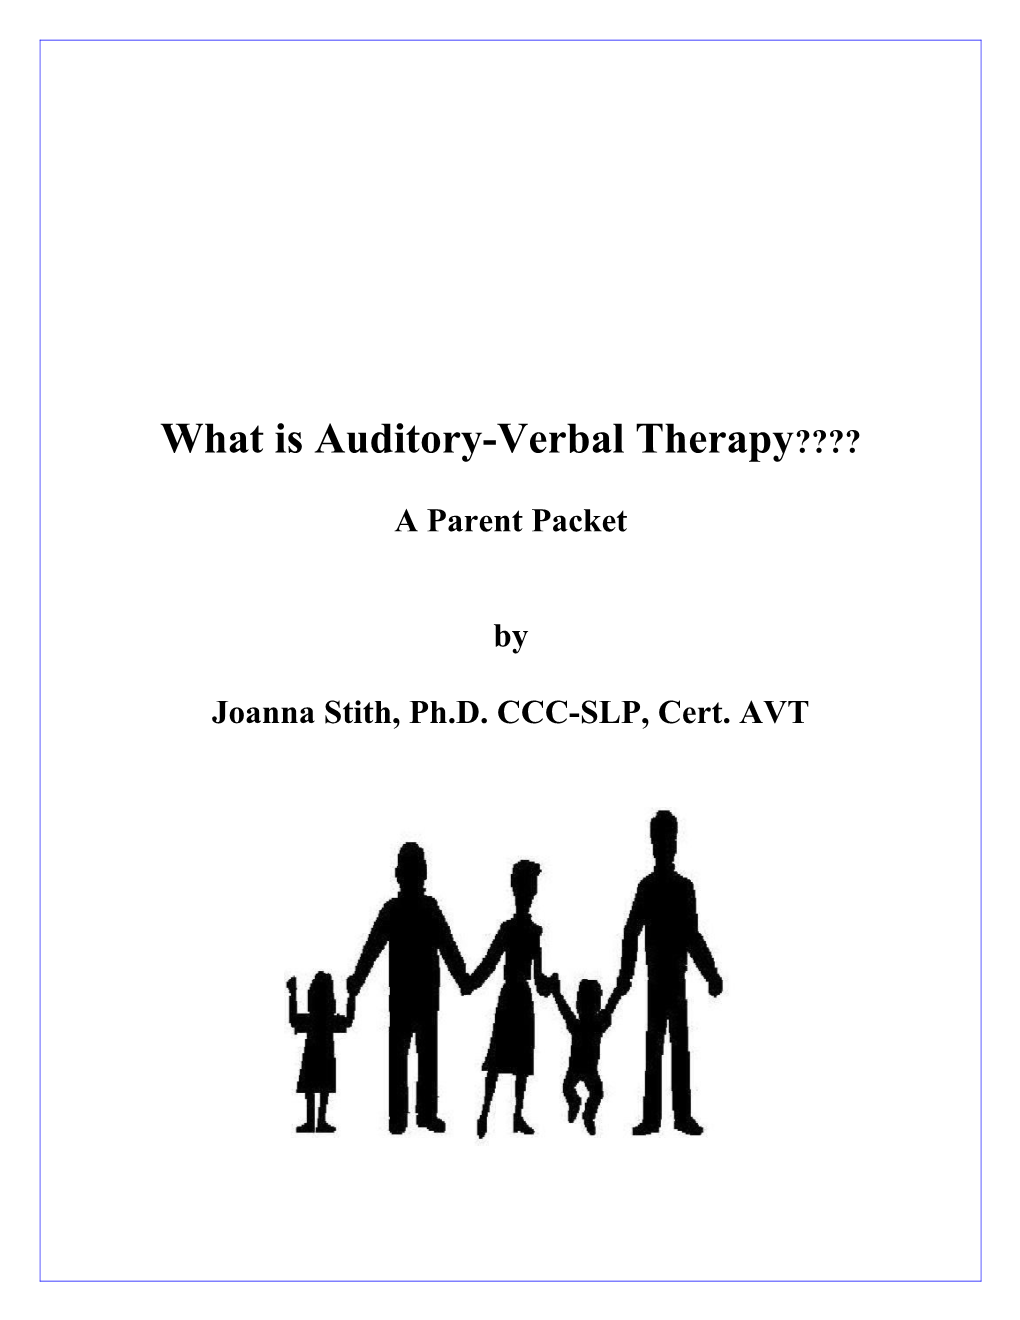 What Is Auditory-Verbal Therapy